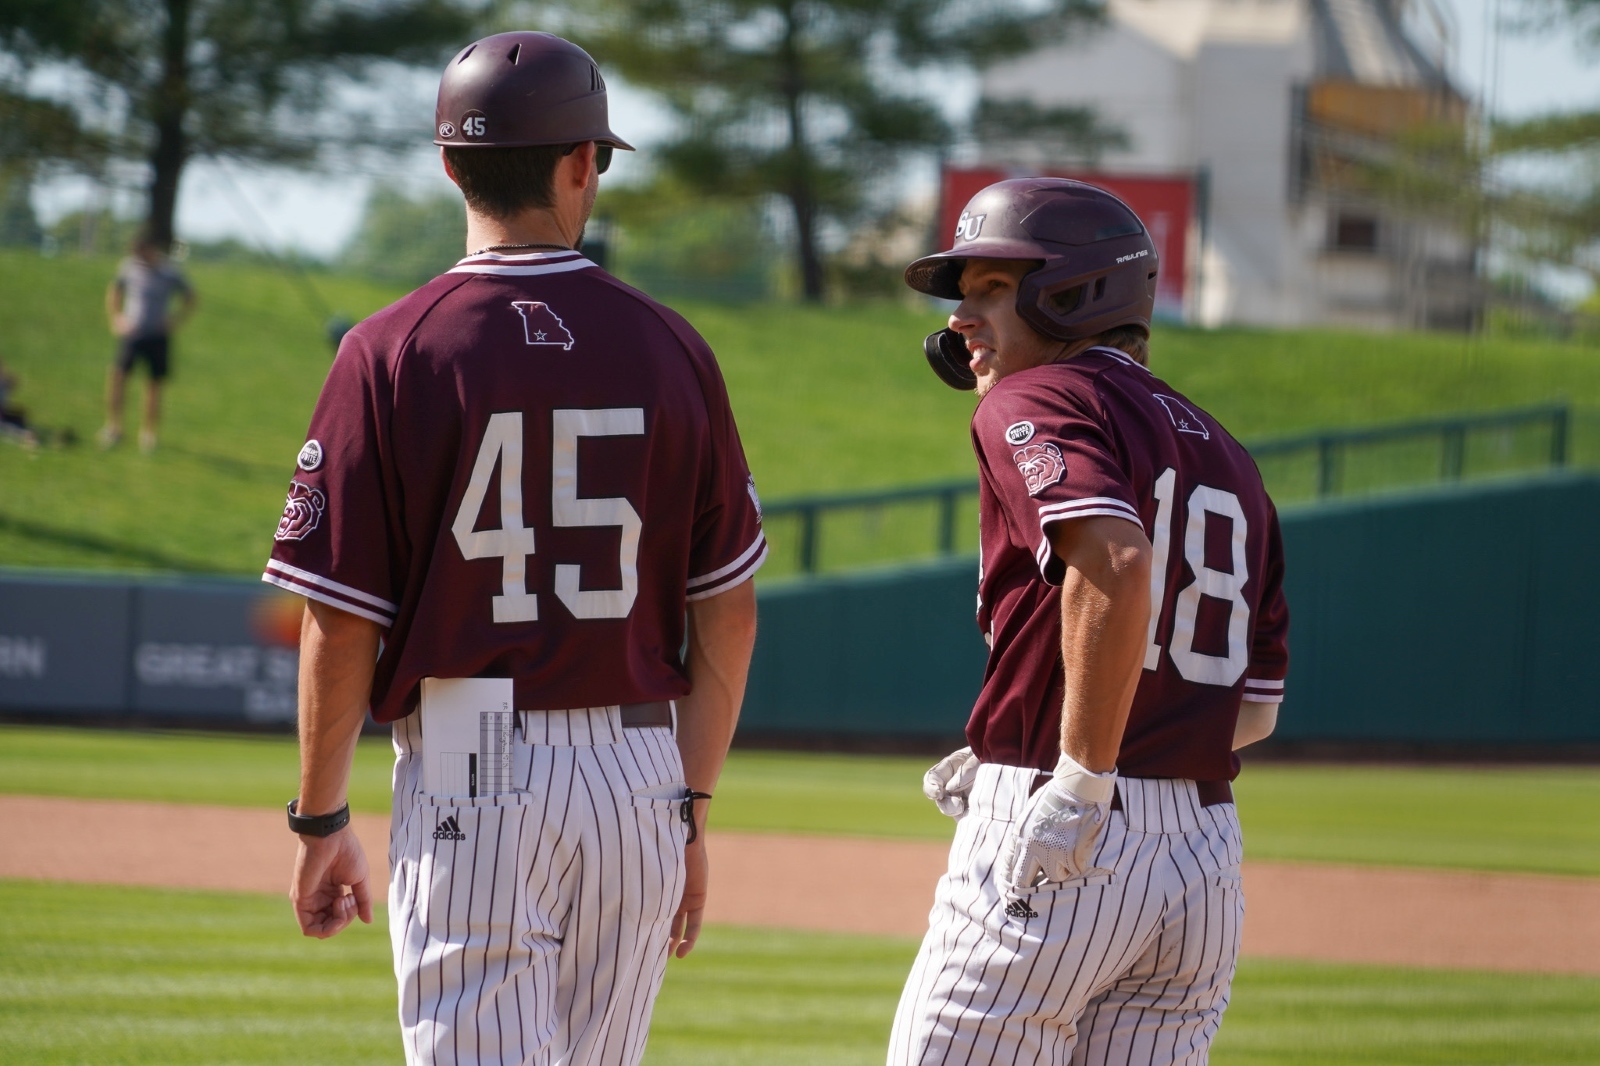 Spencer Nivens, wearing a Missouri State baseball uniform, stands on first base and talks to coach Jeremy Cologna